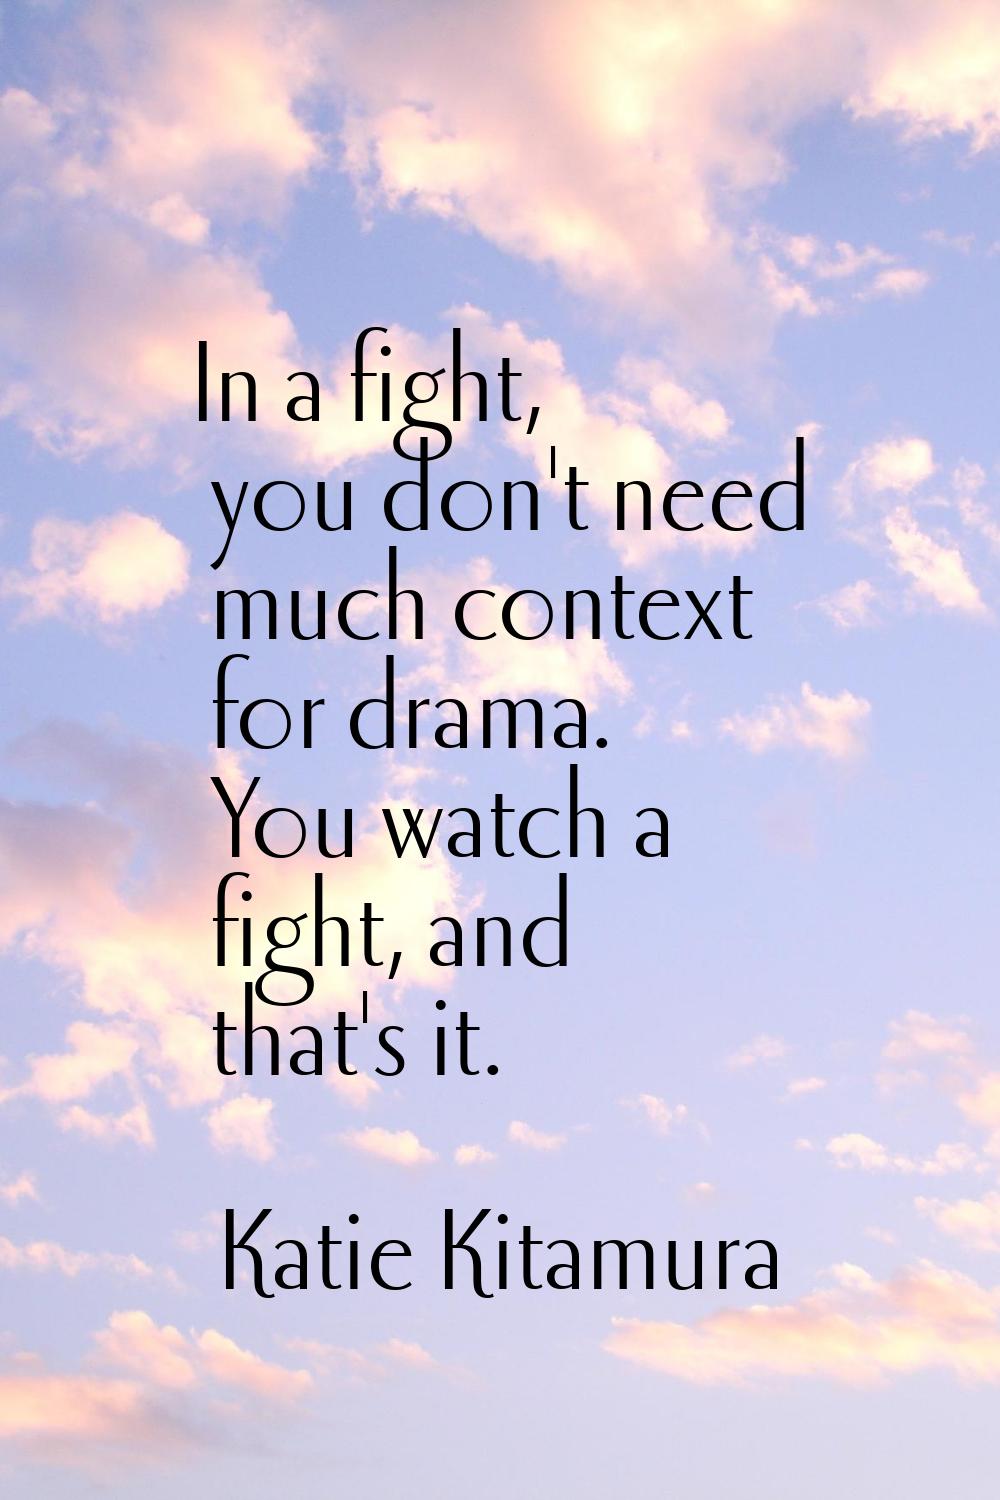 In a fight, you don't need much context for drama. You watch a fight, and that's it.